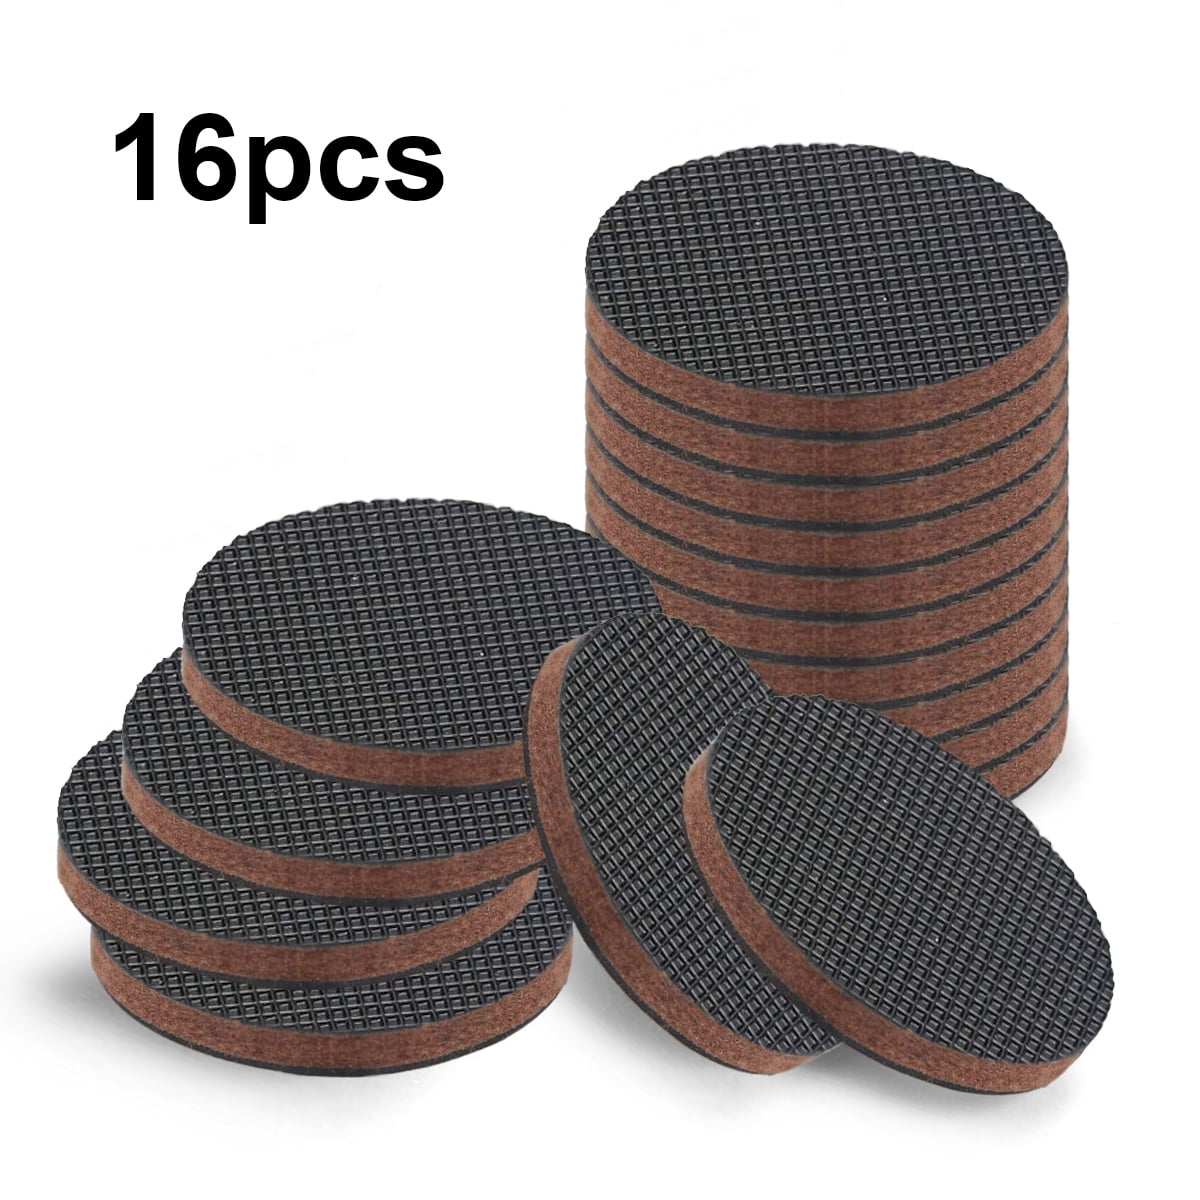 Lavaport Non Slip Furniture Pads-Best SelfAdhesive Furniture Grippers  Rubber Feet Couch Stoppers 